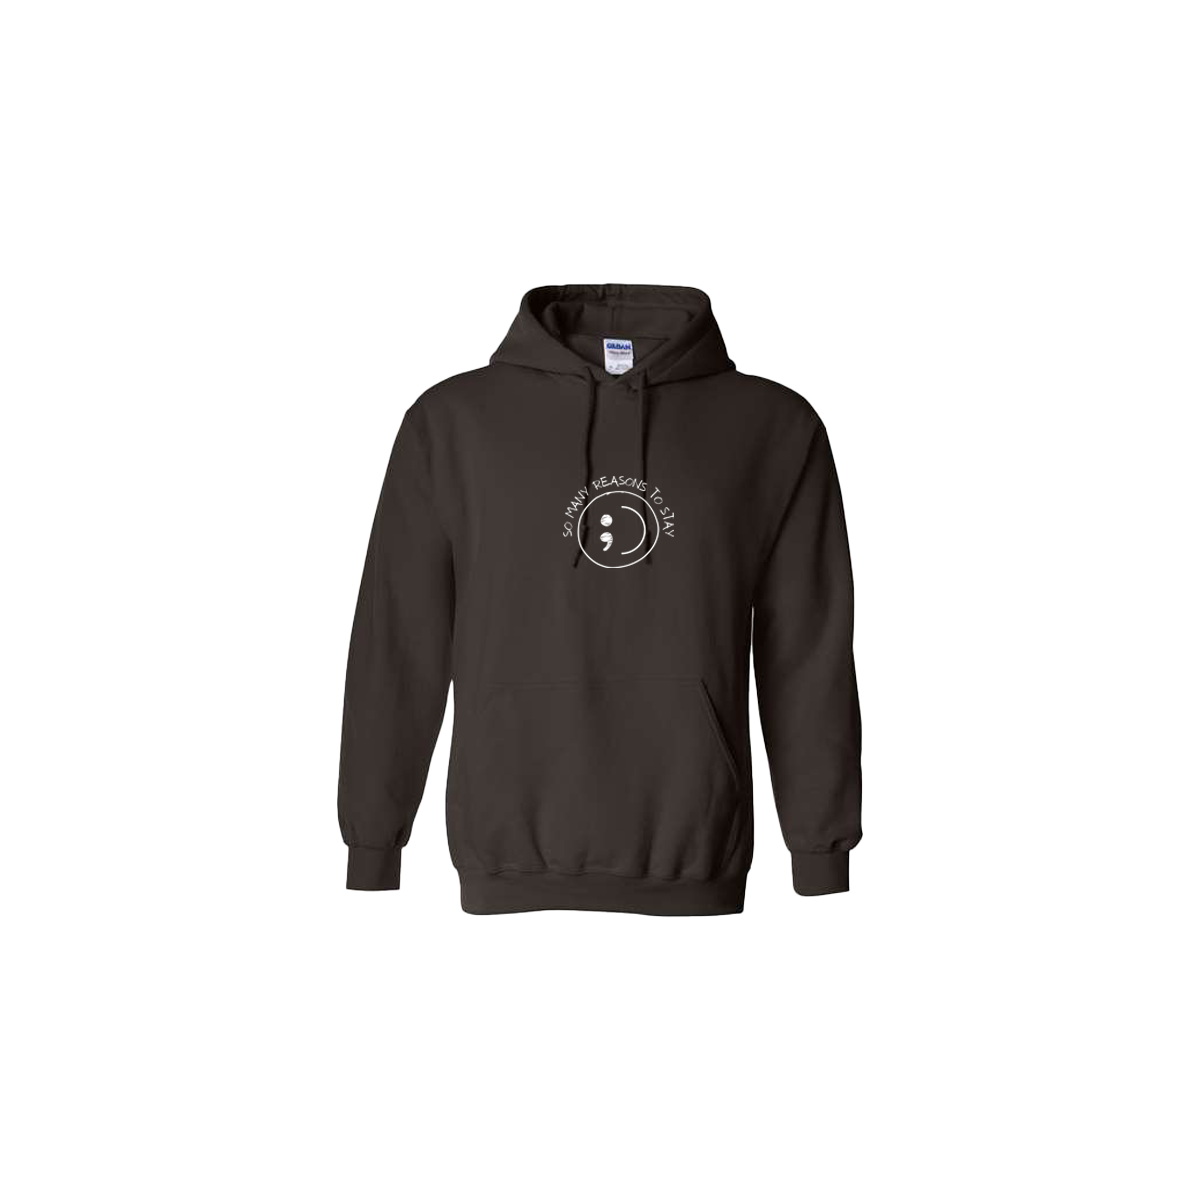 So Many Reasons to Stay Embroidered Brown Hoodie - Mental Health Awareness Clothing